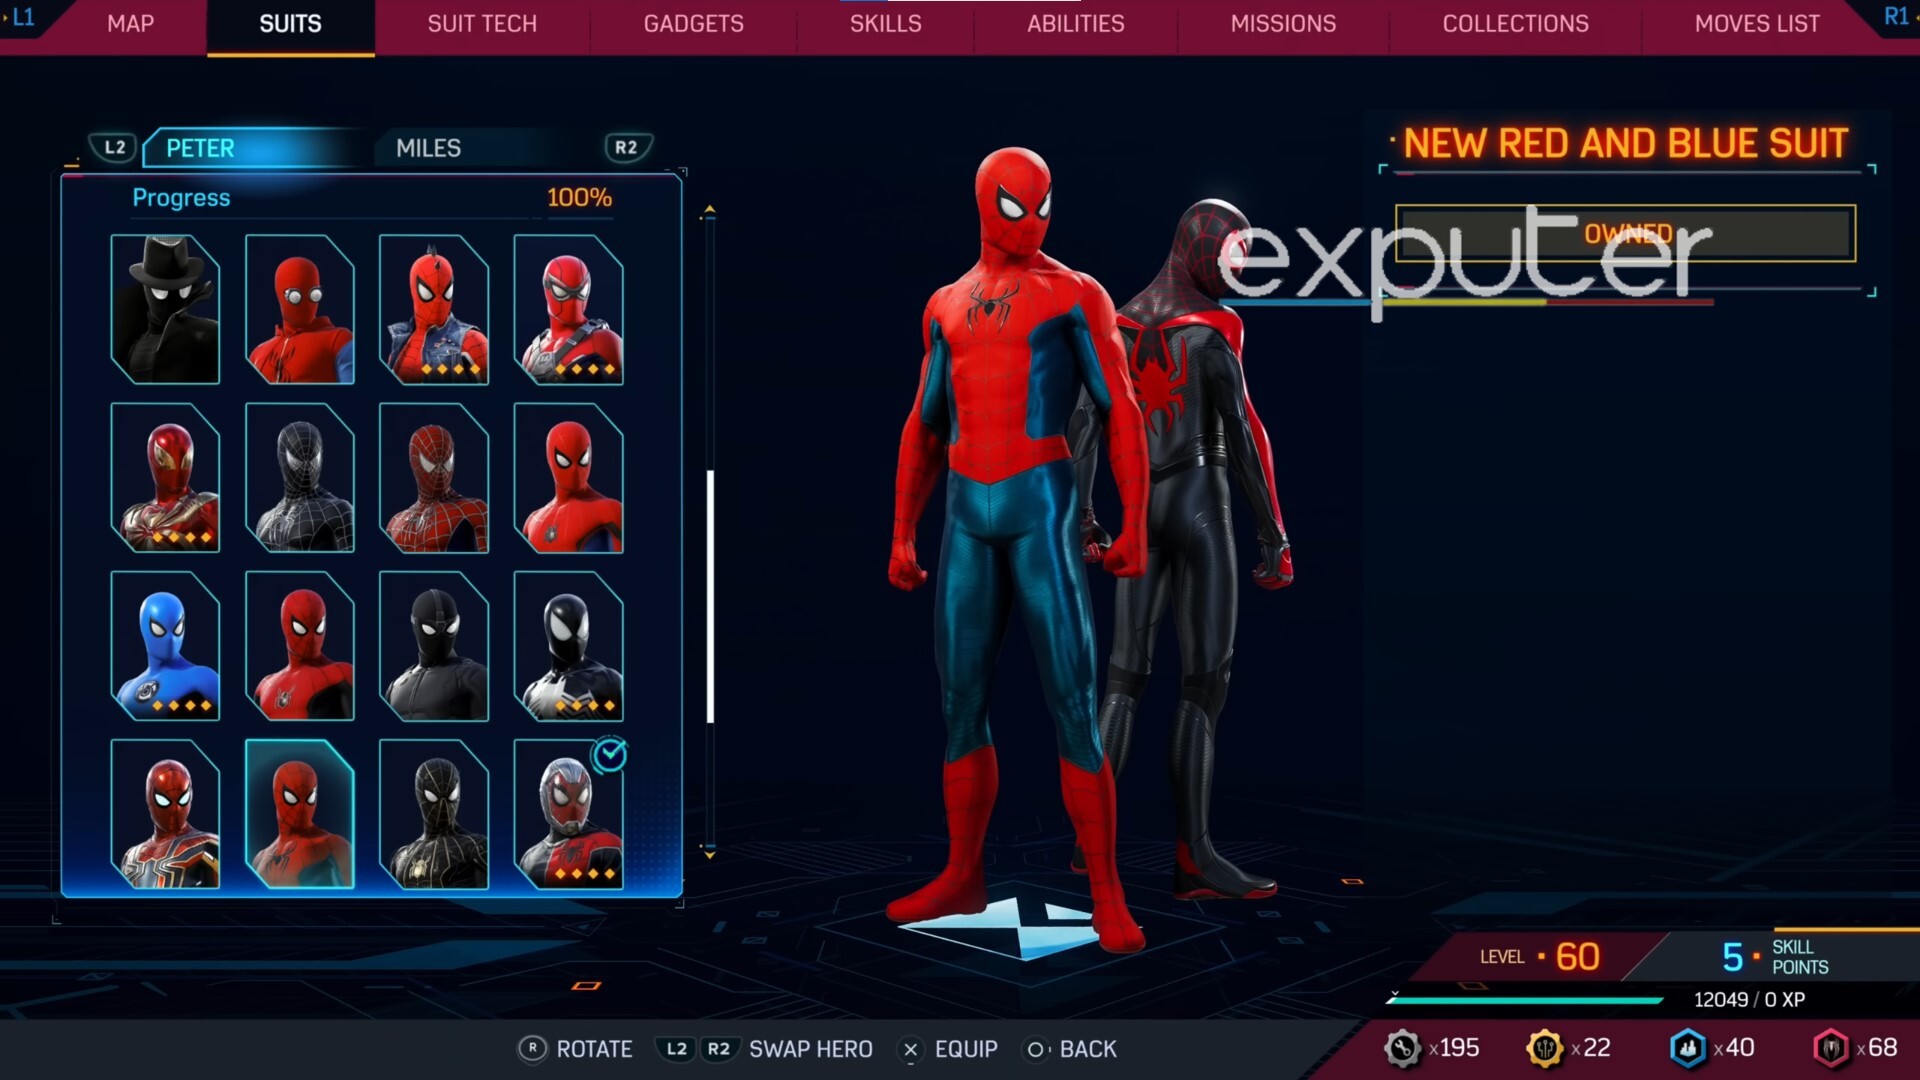 New Red And Blue Suit In game 